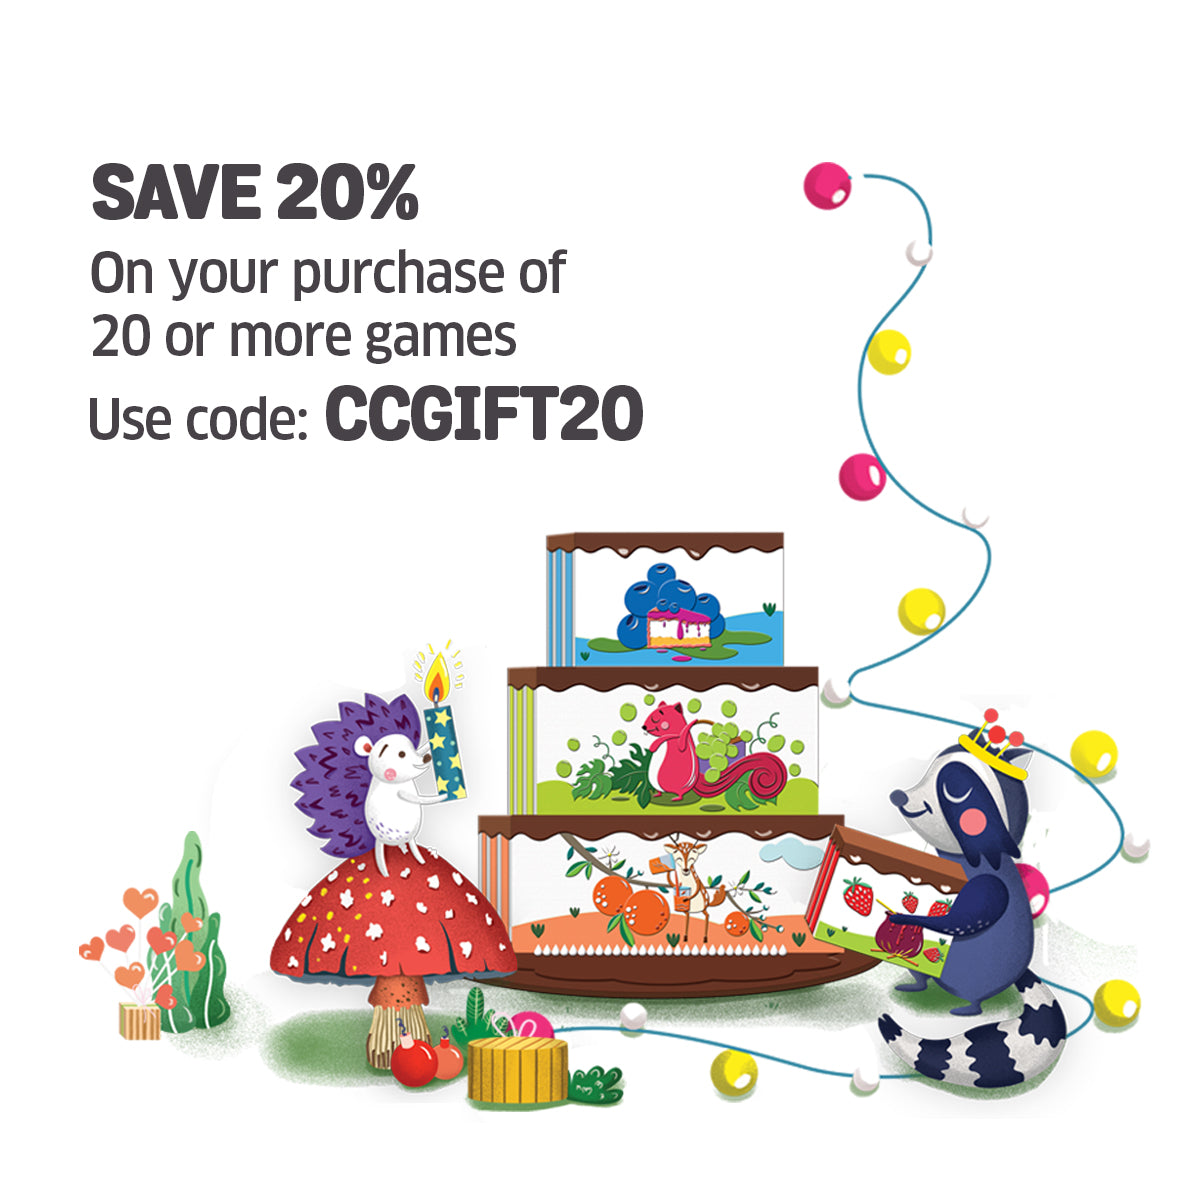 Great birthday gifts for children and awesome returns gifts, games, puzzles, and crafts. Innovative gifts. Buy 20 or more and save 20%. Favourites of parents and children worldwide.